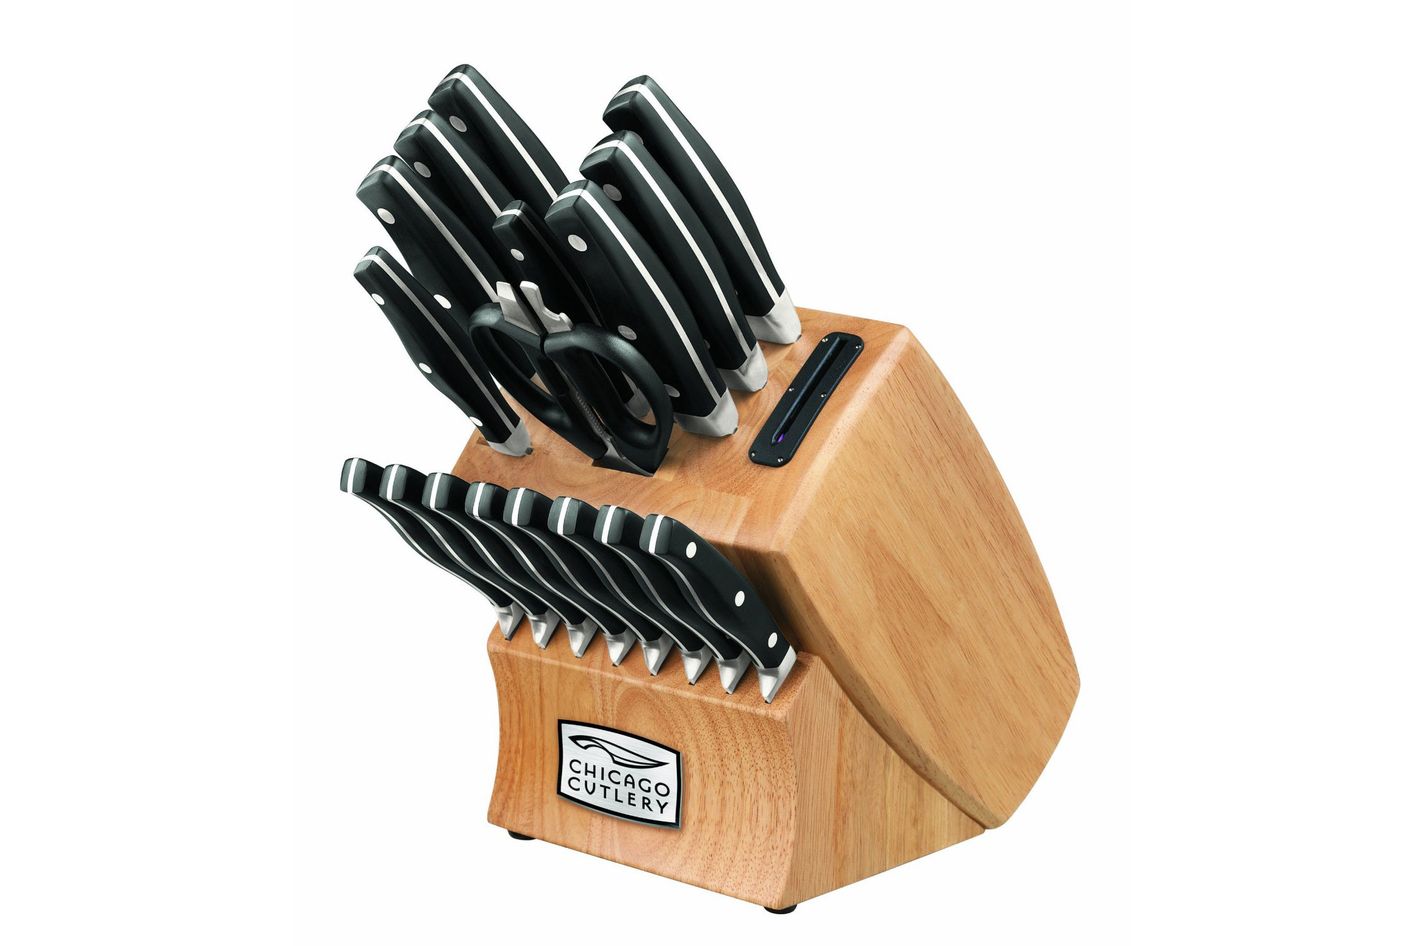 11 Best Kitchen Knife Sets And Reviews 2018